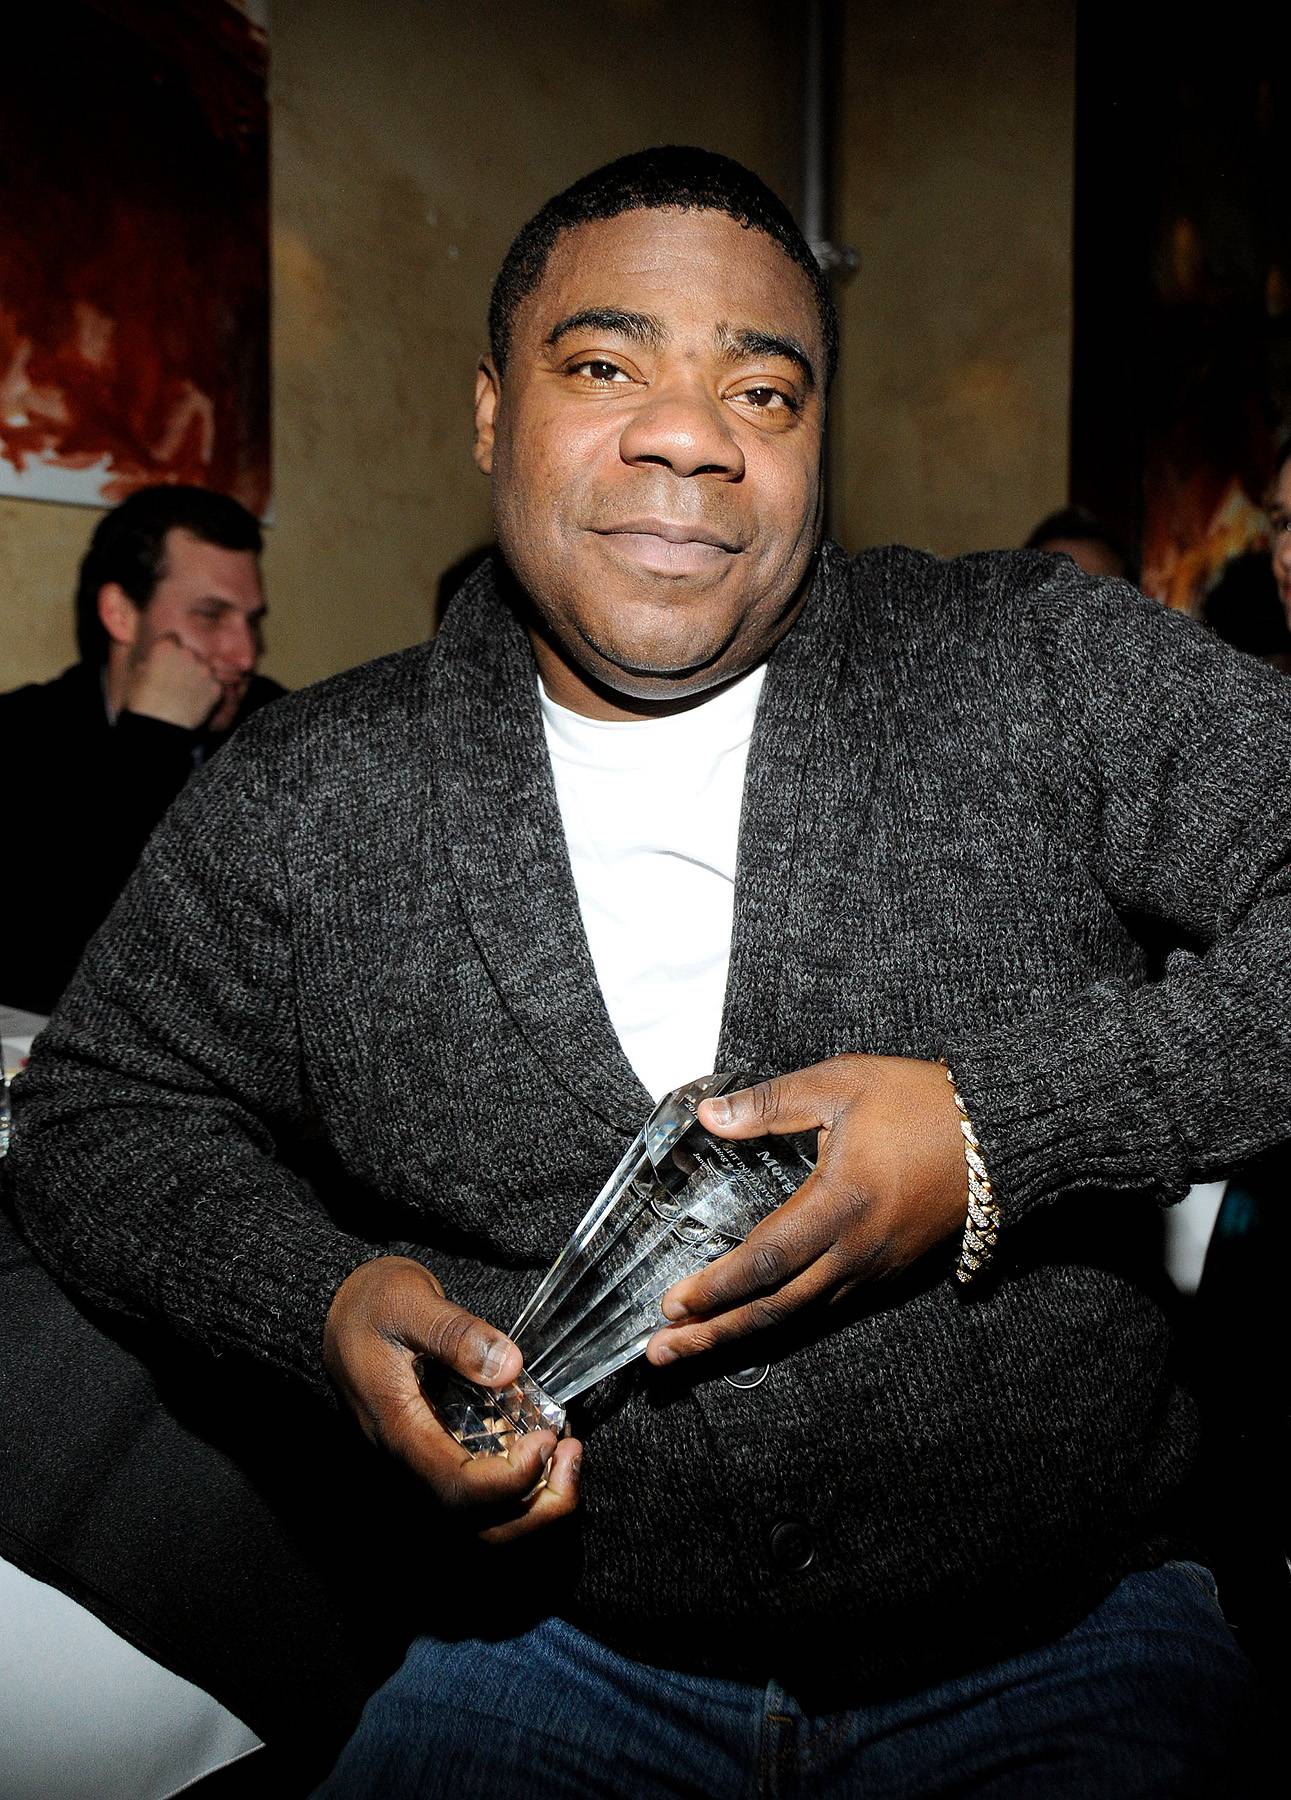 Tracy Morgan after being hospitalized for collapsing: - &quot;Superman ran into a little kryptonite. The high altitude in Utah shook up this kid from Brooklyn.”&nbsp;(Photo: Frazer Harrison/Getty Images)